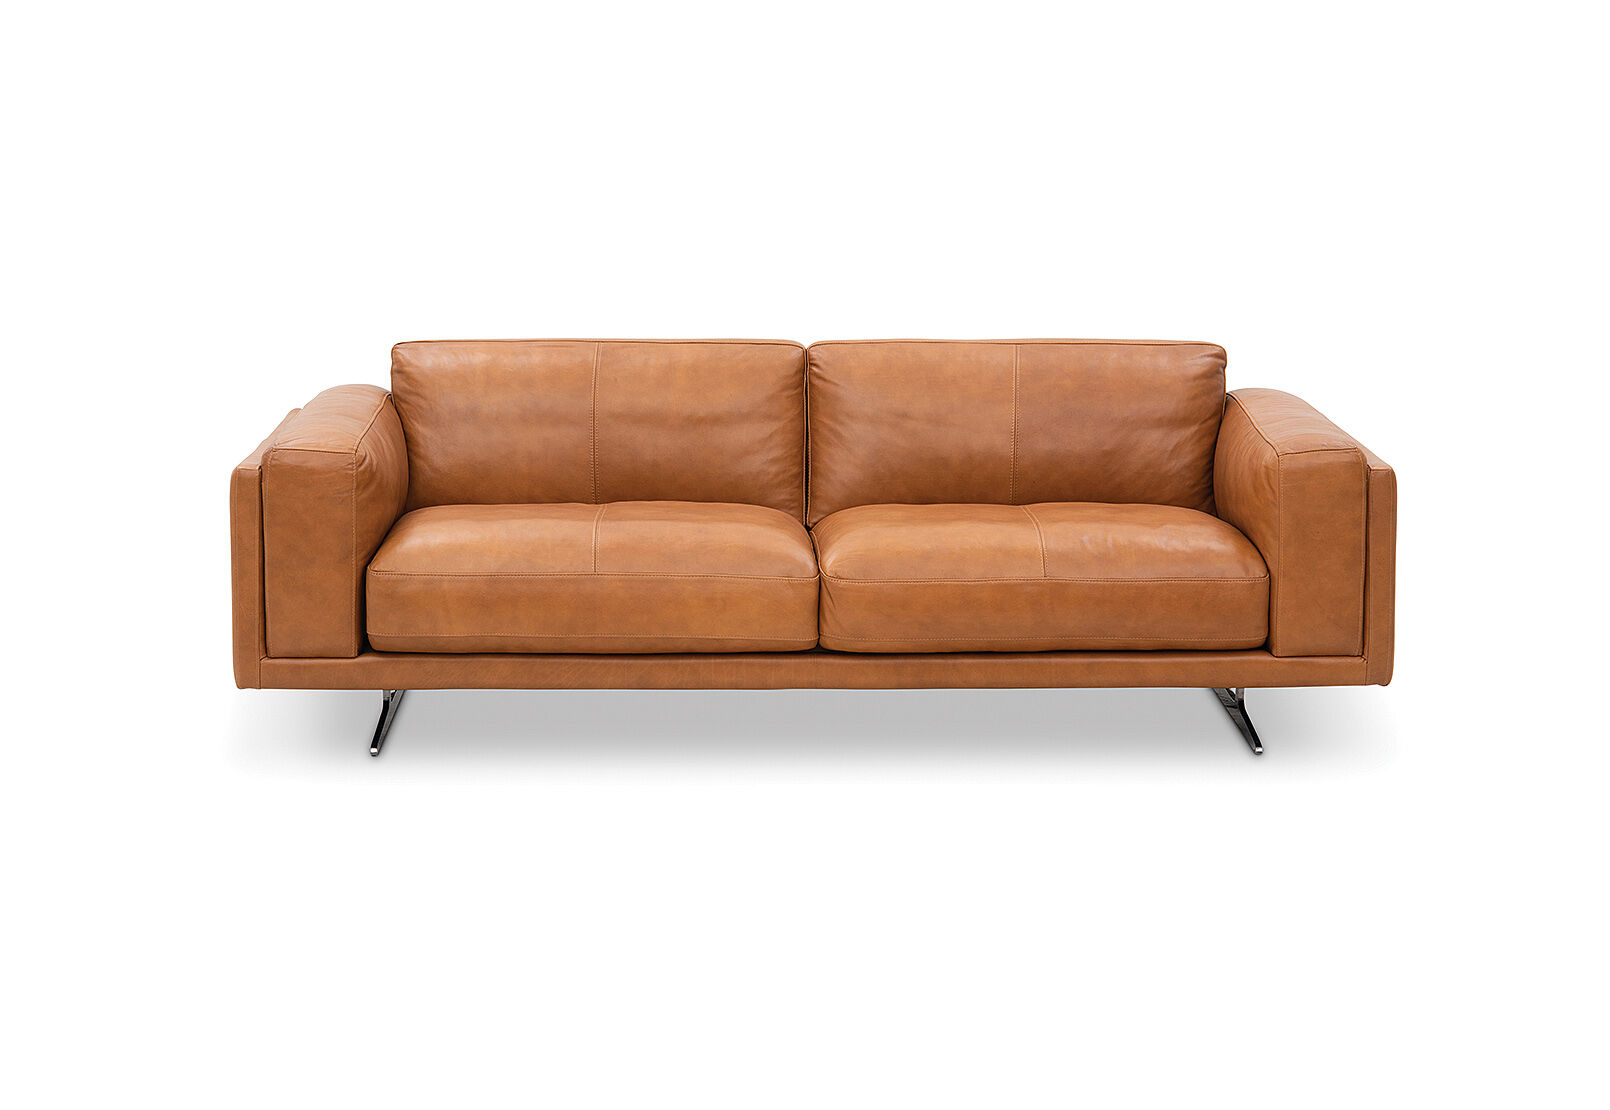 Tan Alessandra Leather 3 Seater Sofa, Tan Leather Pull Out Couch